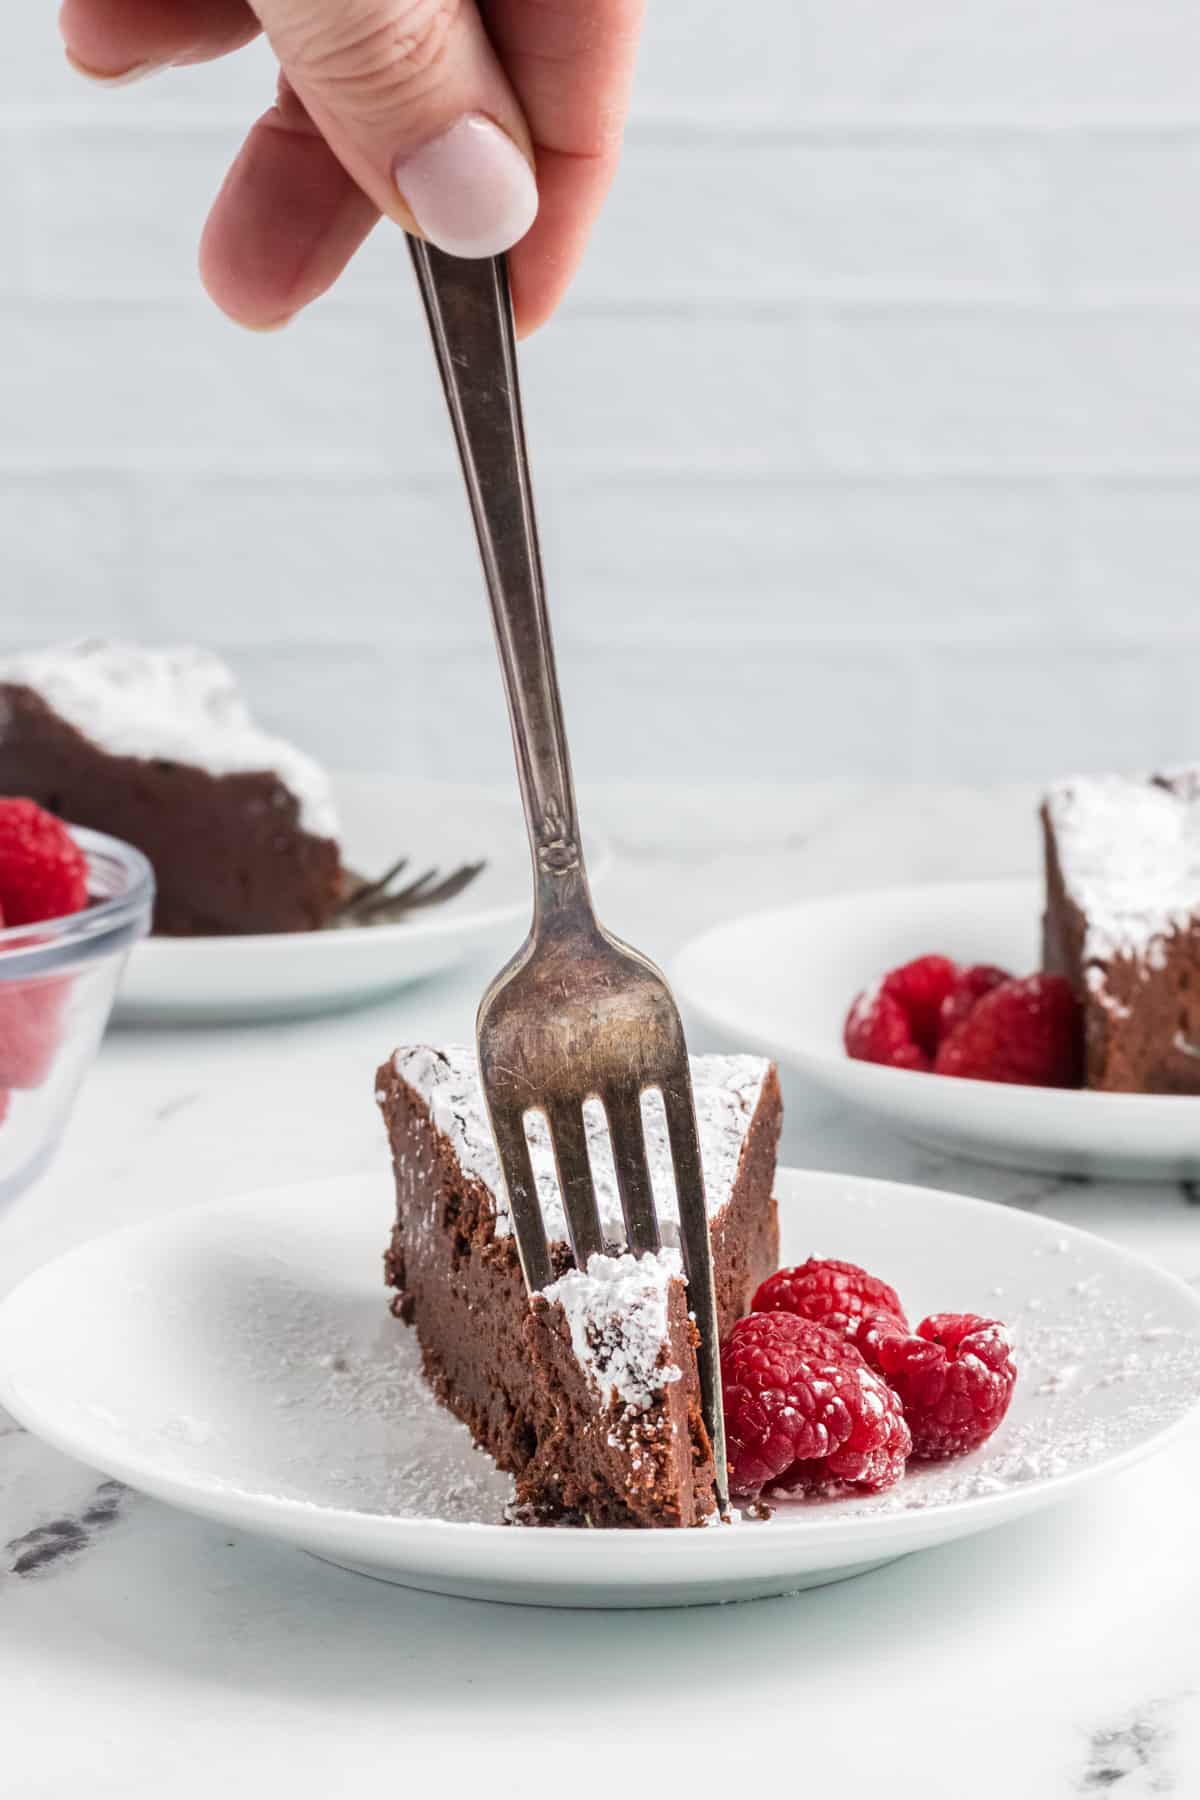 A fork is digging into a slice of chocolate cake.